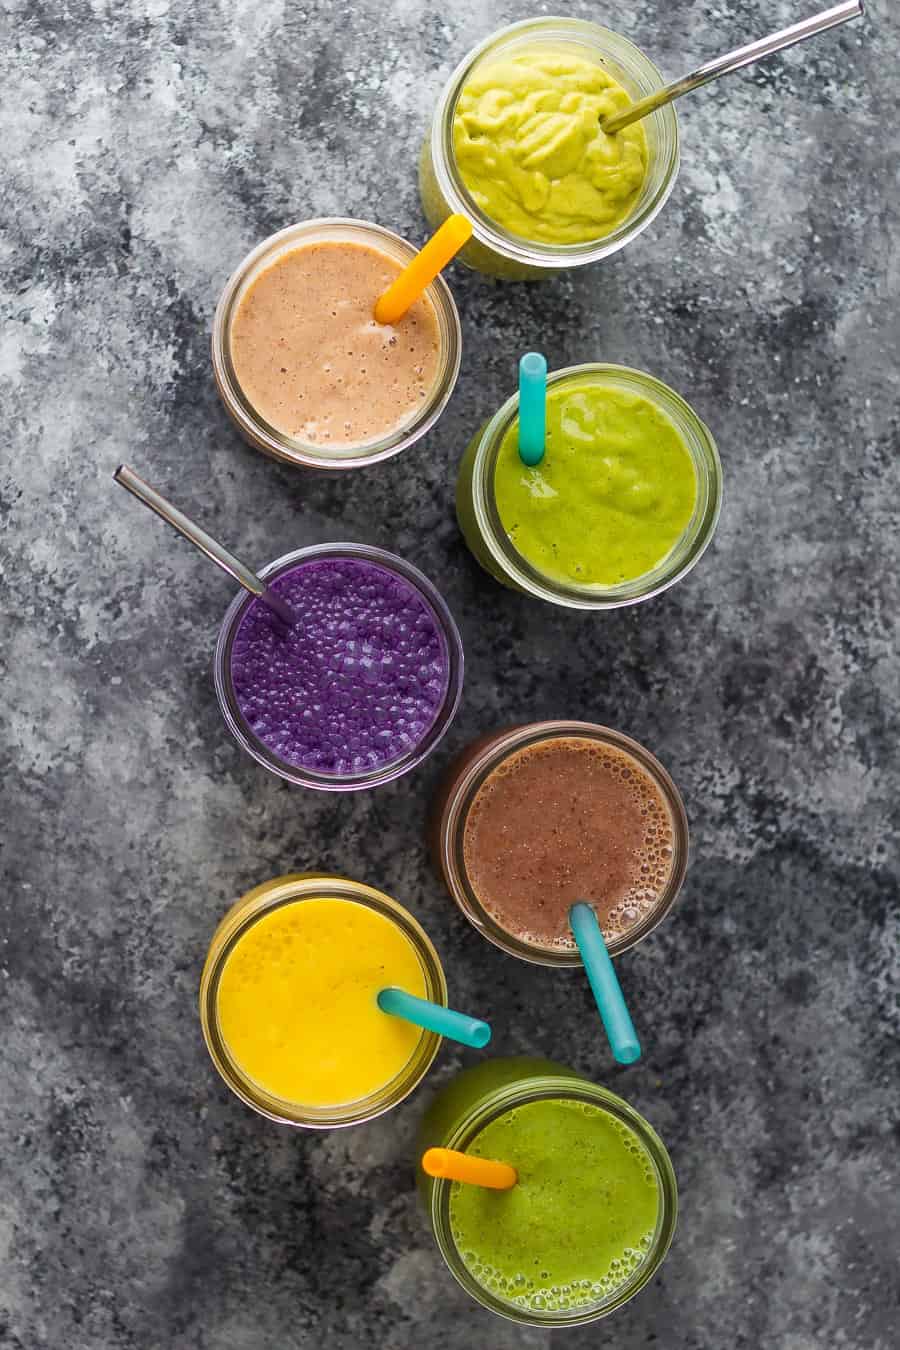 Can You Freeze Smoothies? - Going Zero Waste